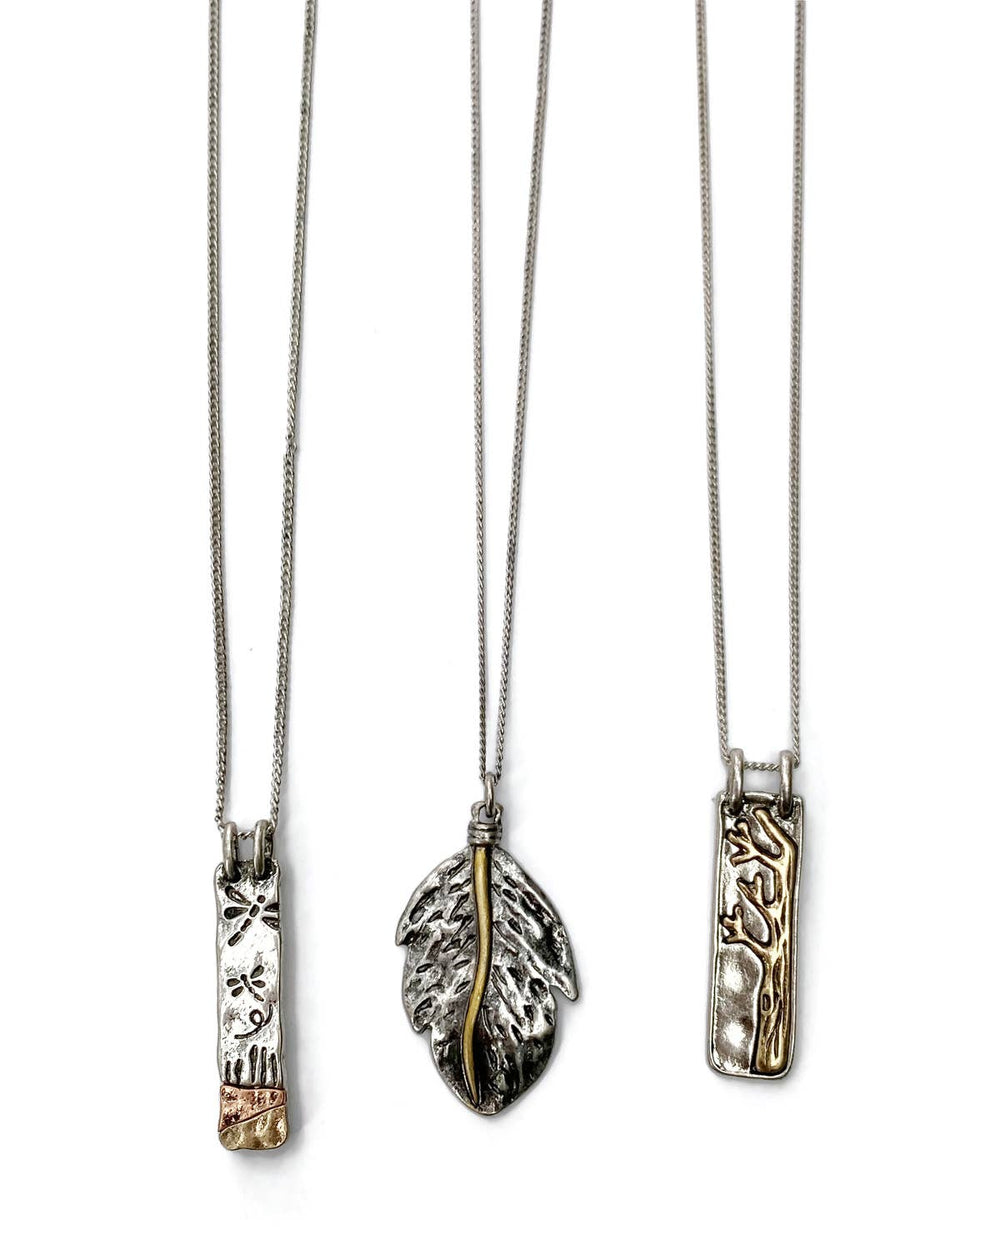 Antique Silver & Gold Nature Themed Charm Necklaces